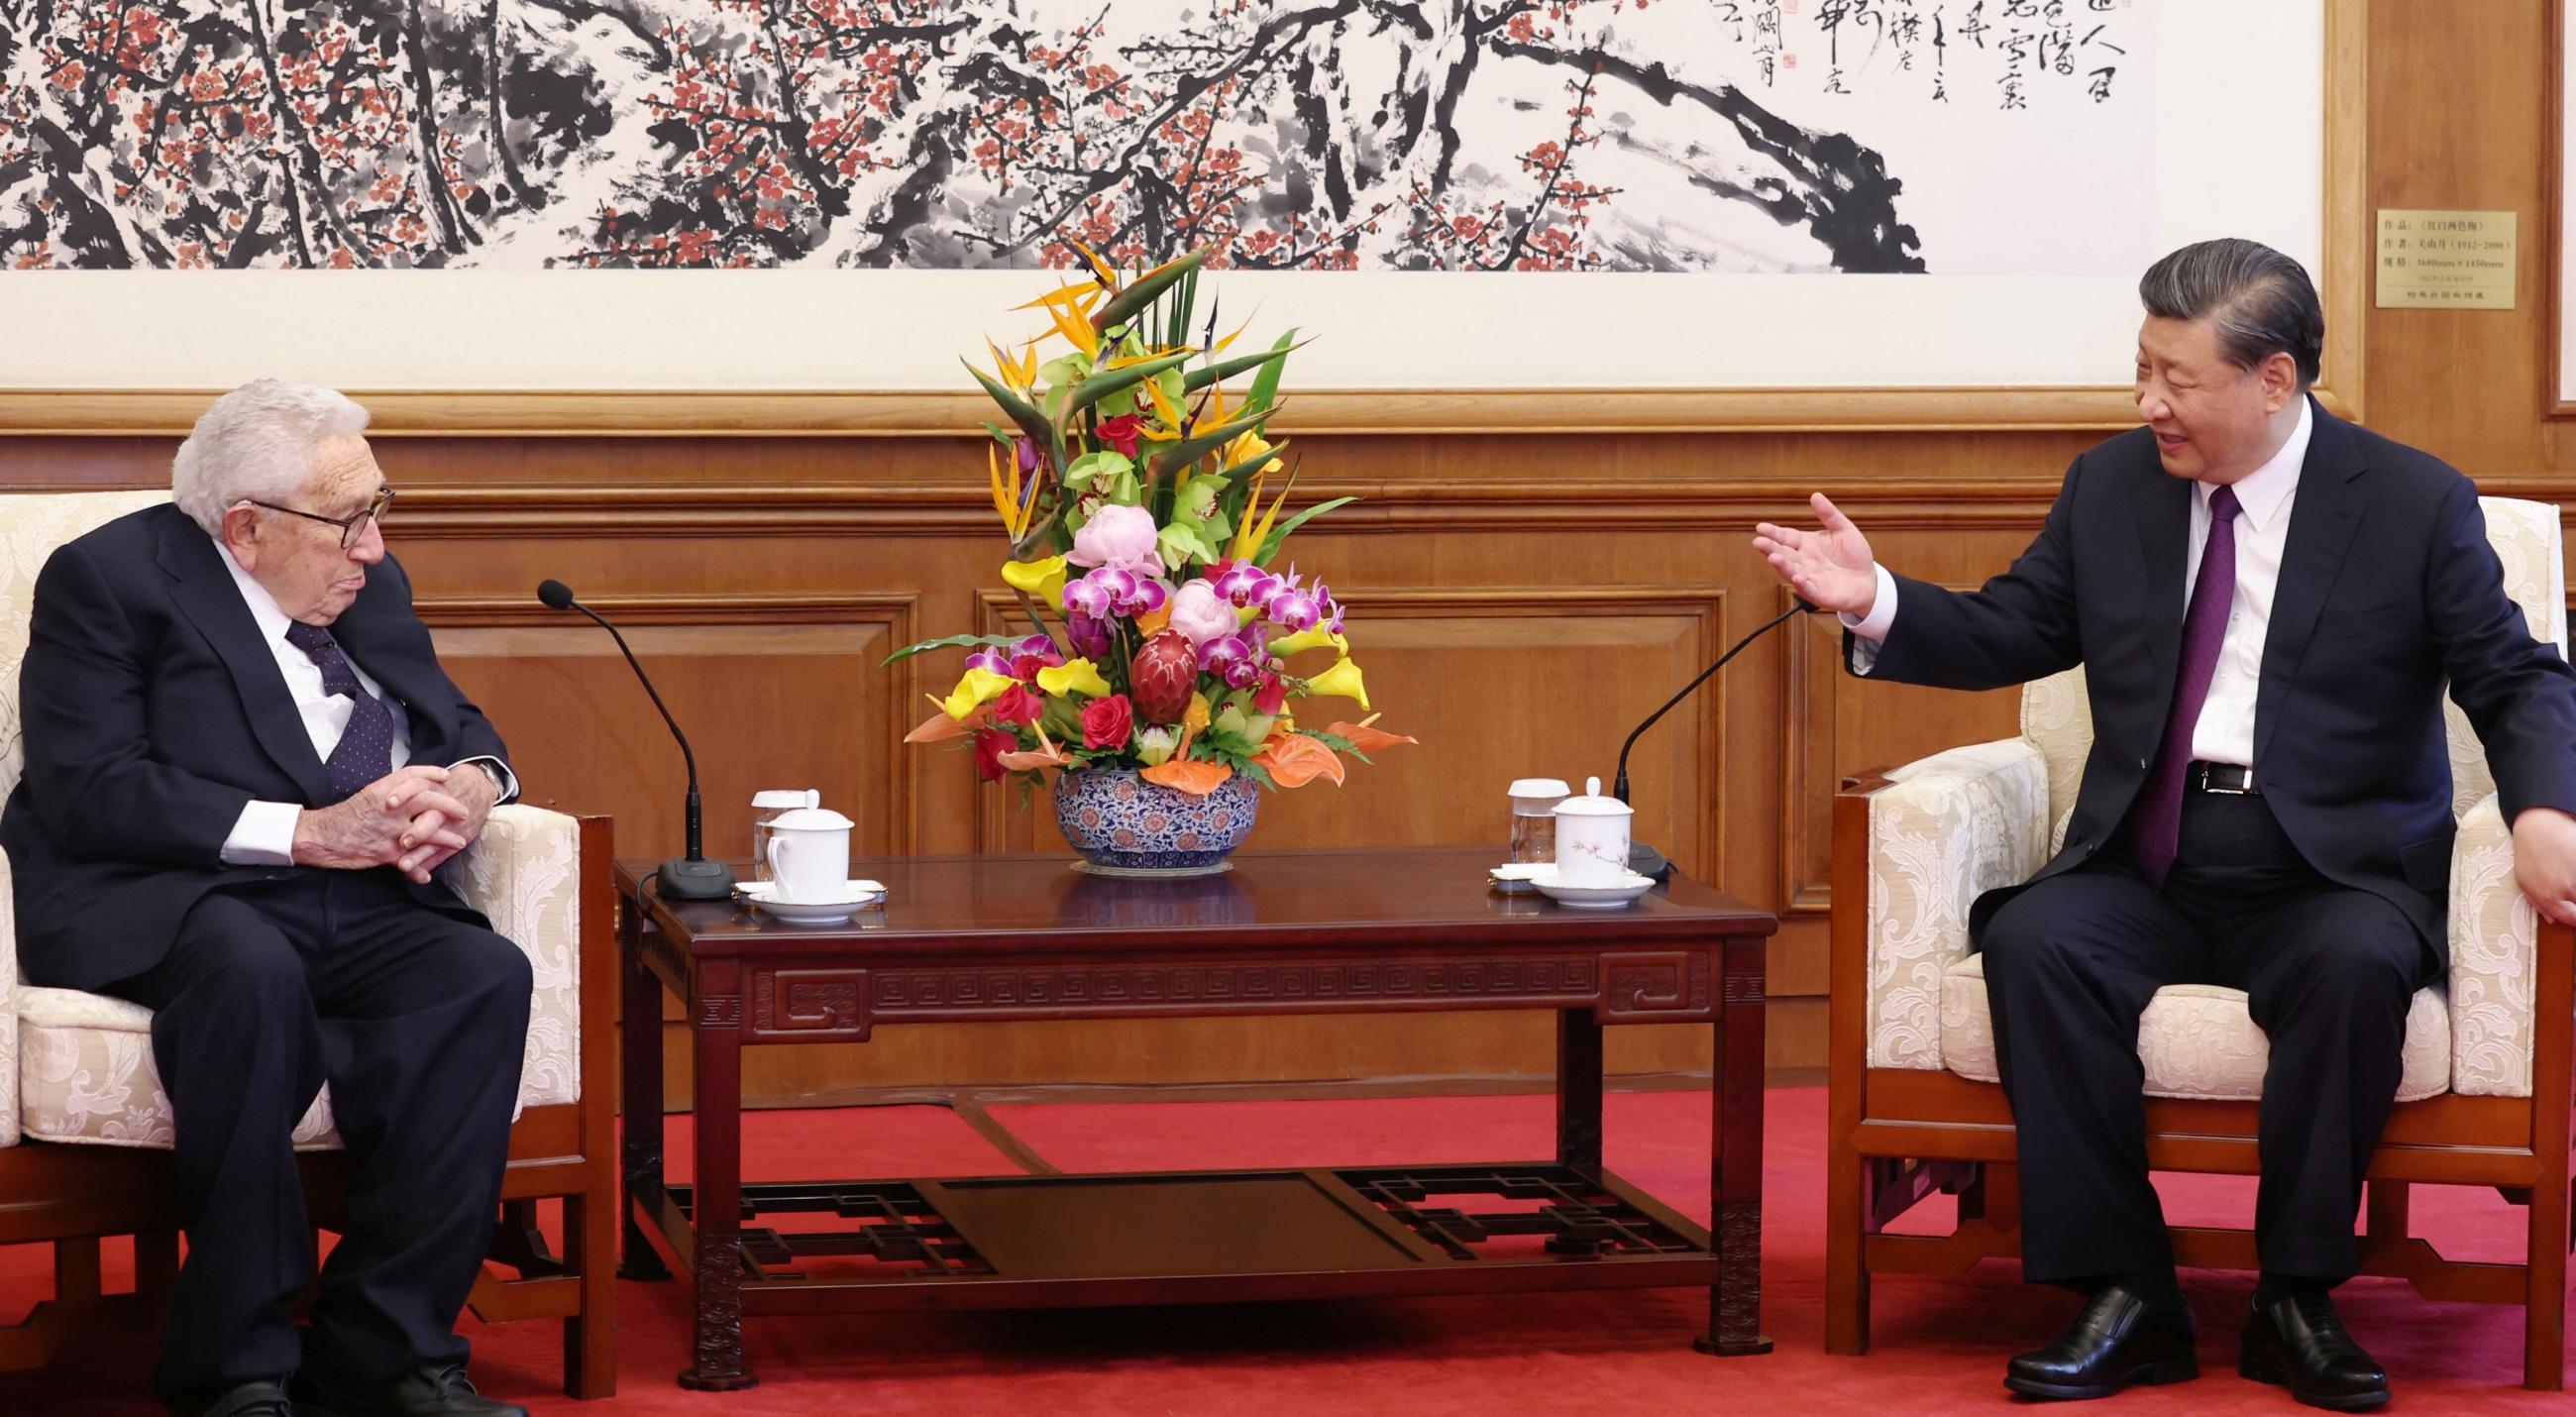 Chinese President Xi Jinping and Henry Kissinger, former U.S. secretary of state, attend a meeting.